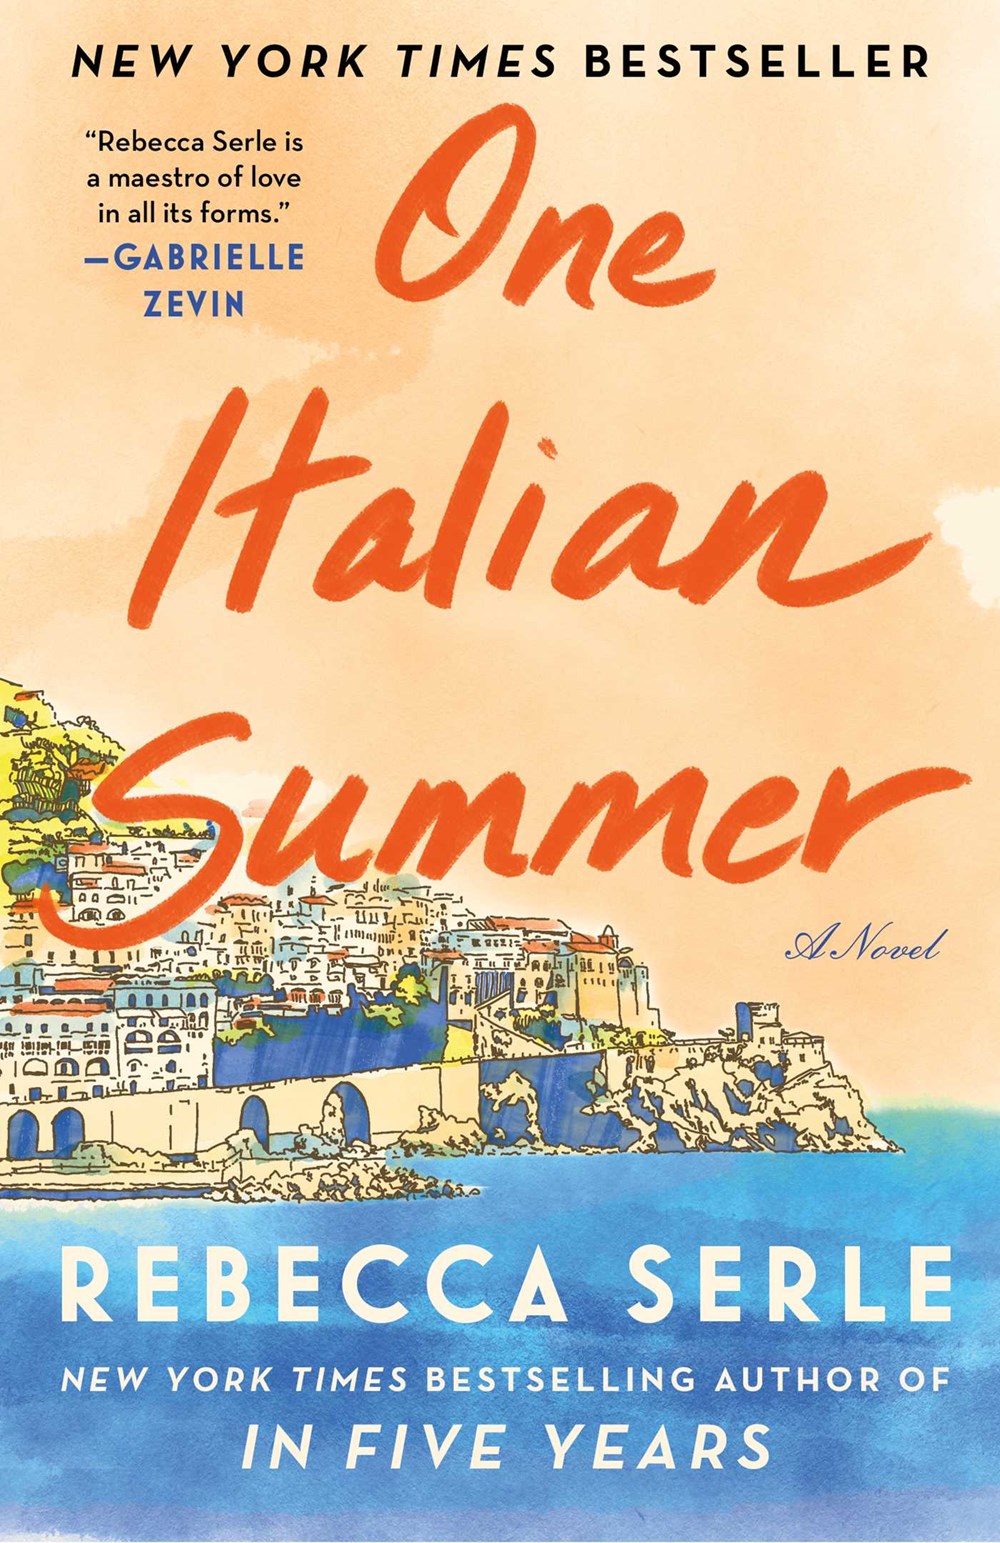 One Italian Summer cover image